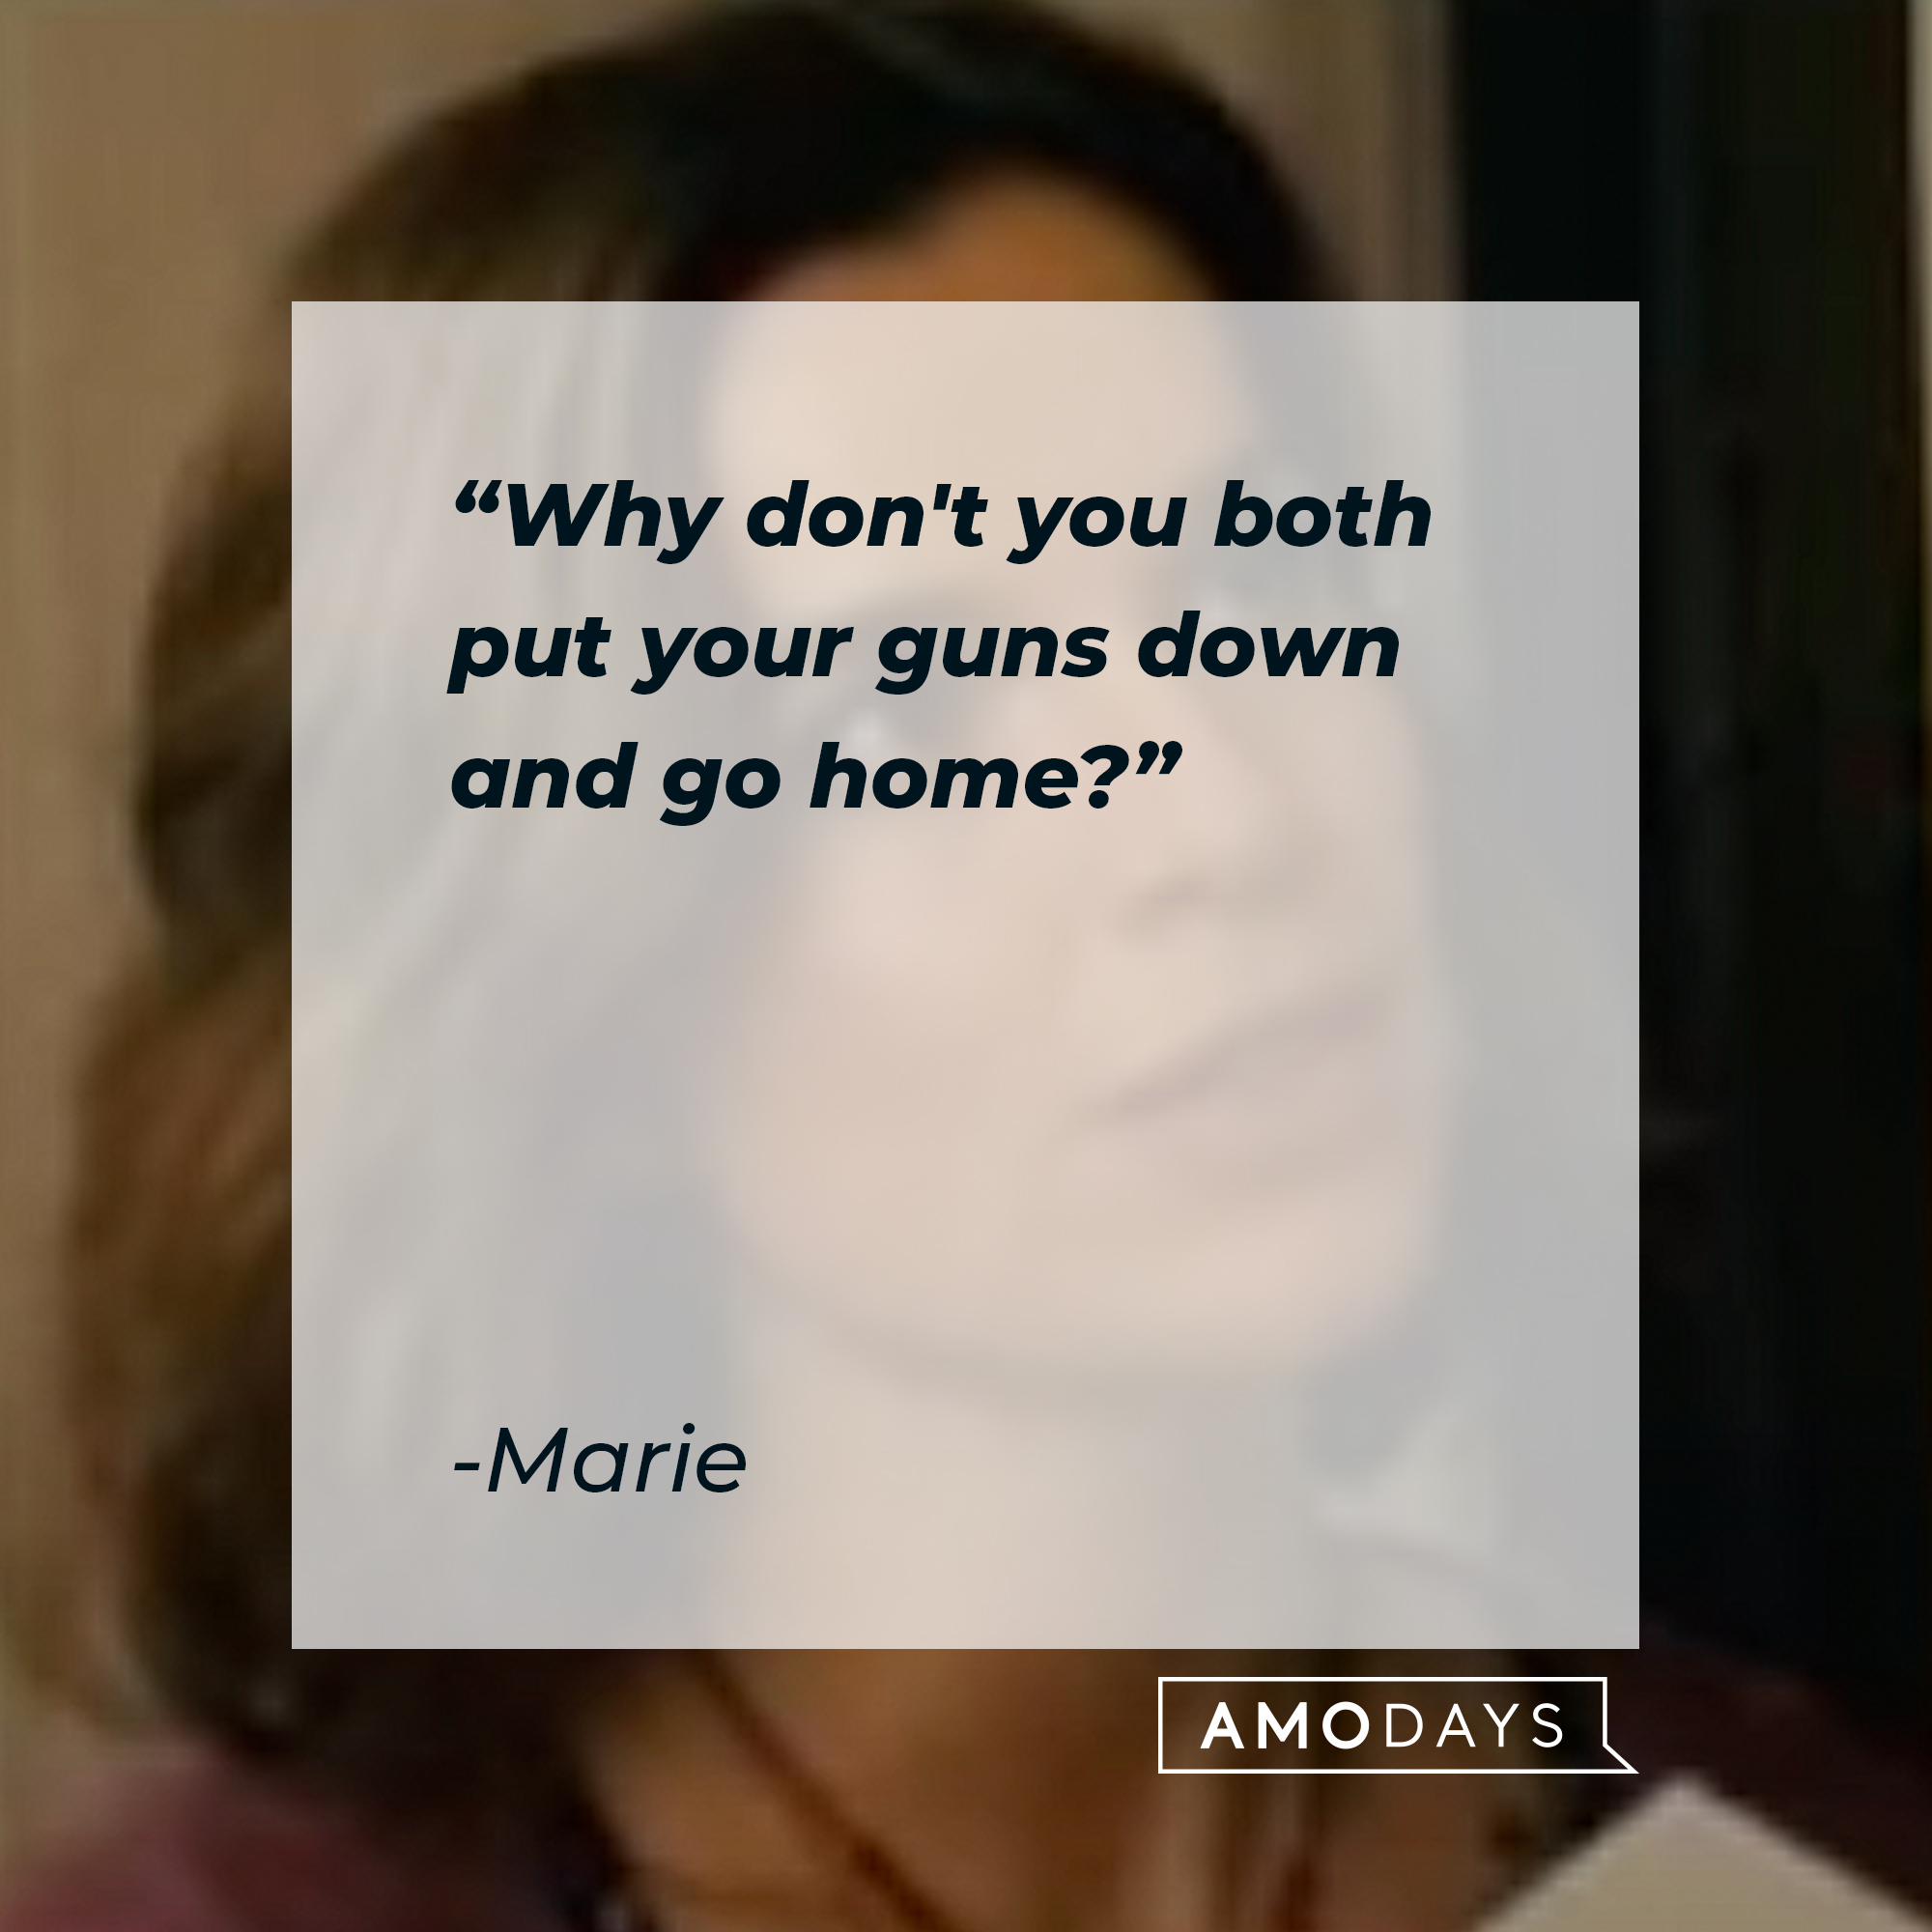 Marie, with her quote: "Why don't you both put your guns down and go home?" | Source: Youtube.com/FocusFeatures